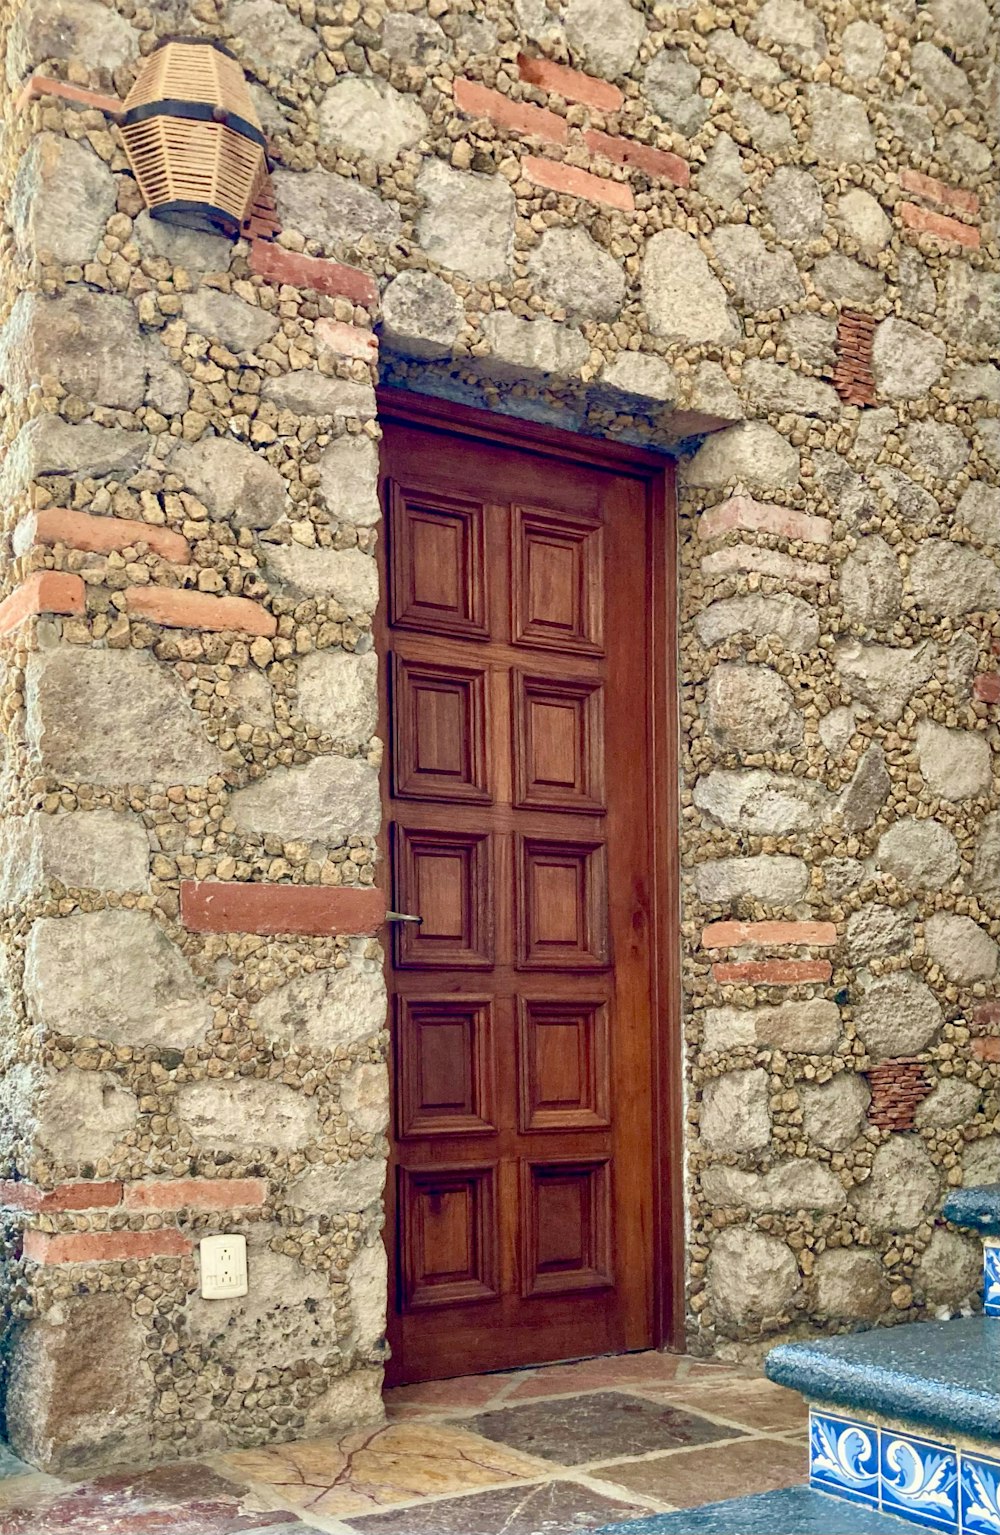 a stone building with a wooden door and bench